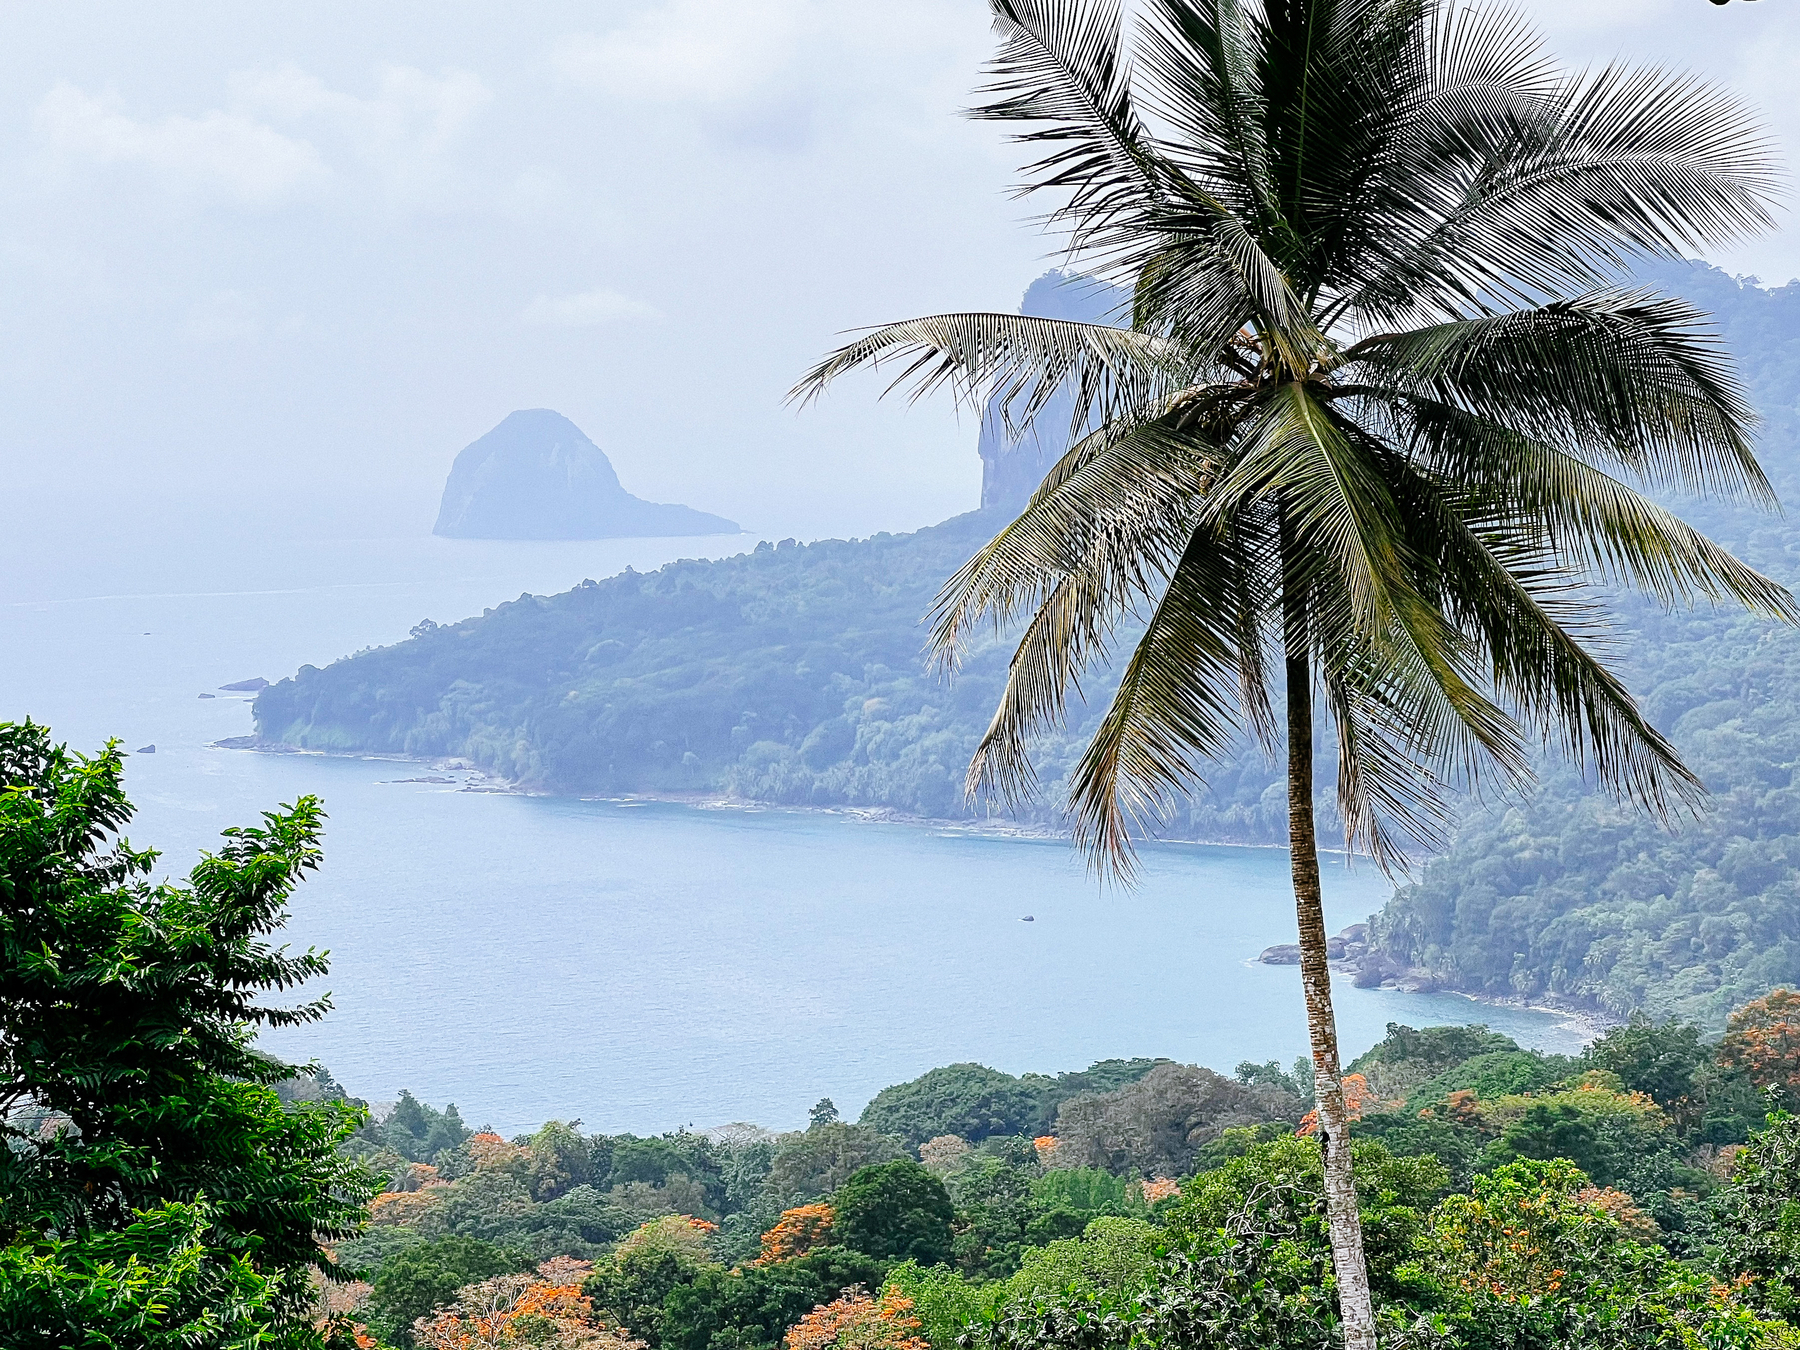 Rainforest landscape. We can see the ocean, an islet far away, and a big palm tree in the foreground. 